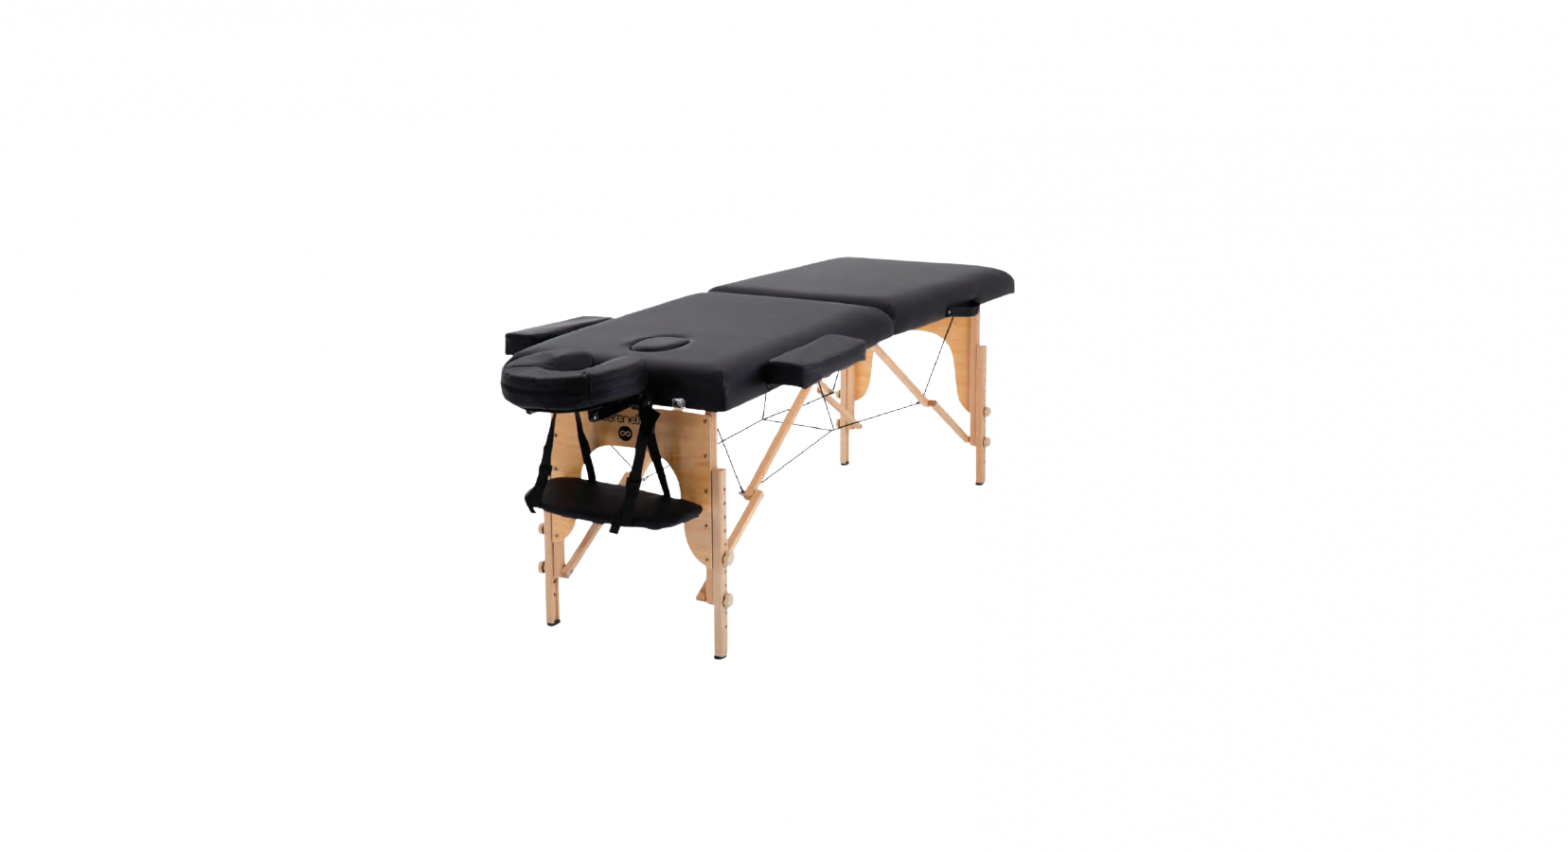 Serenelife SLMASGE1 Portable Massage Table User Guide